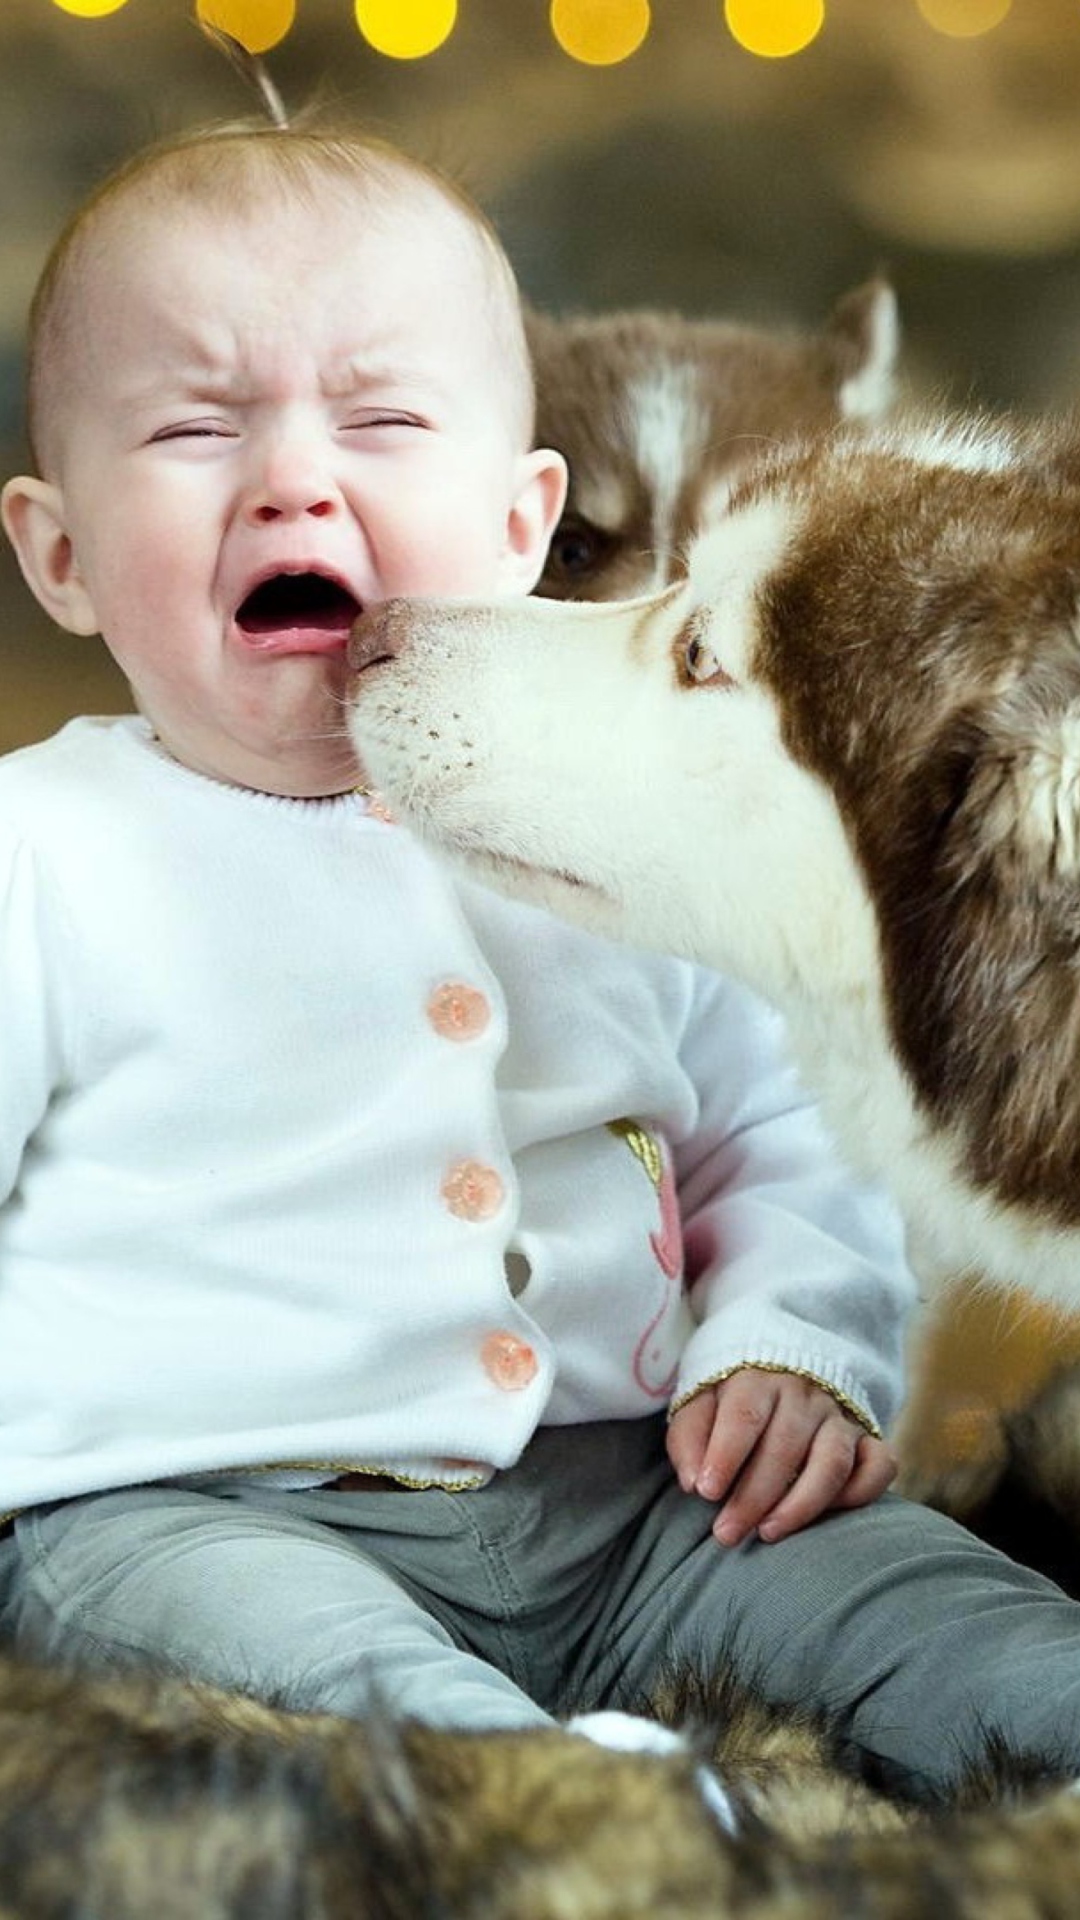 Baby and Dog wallpaper 1080x1920